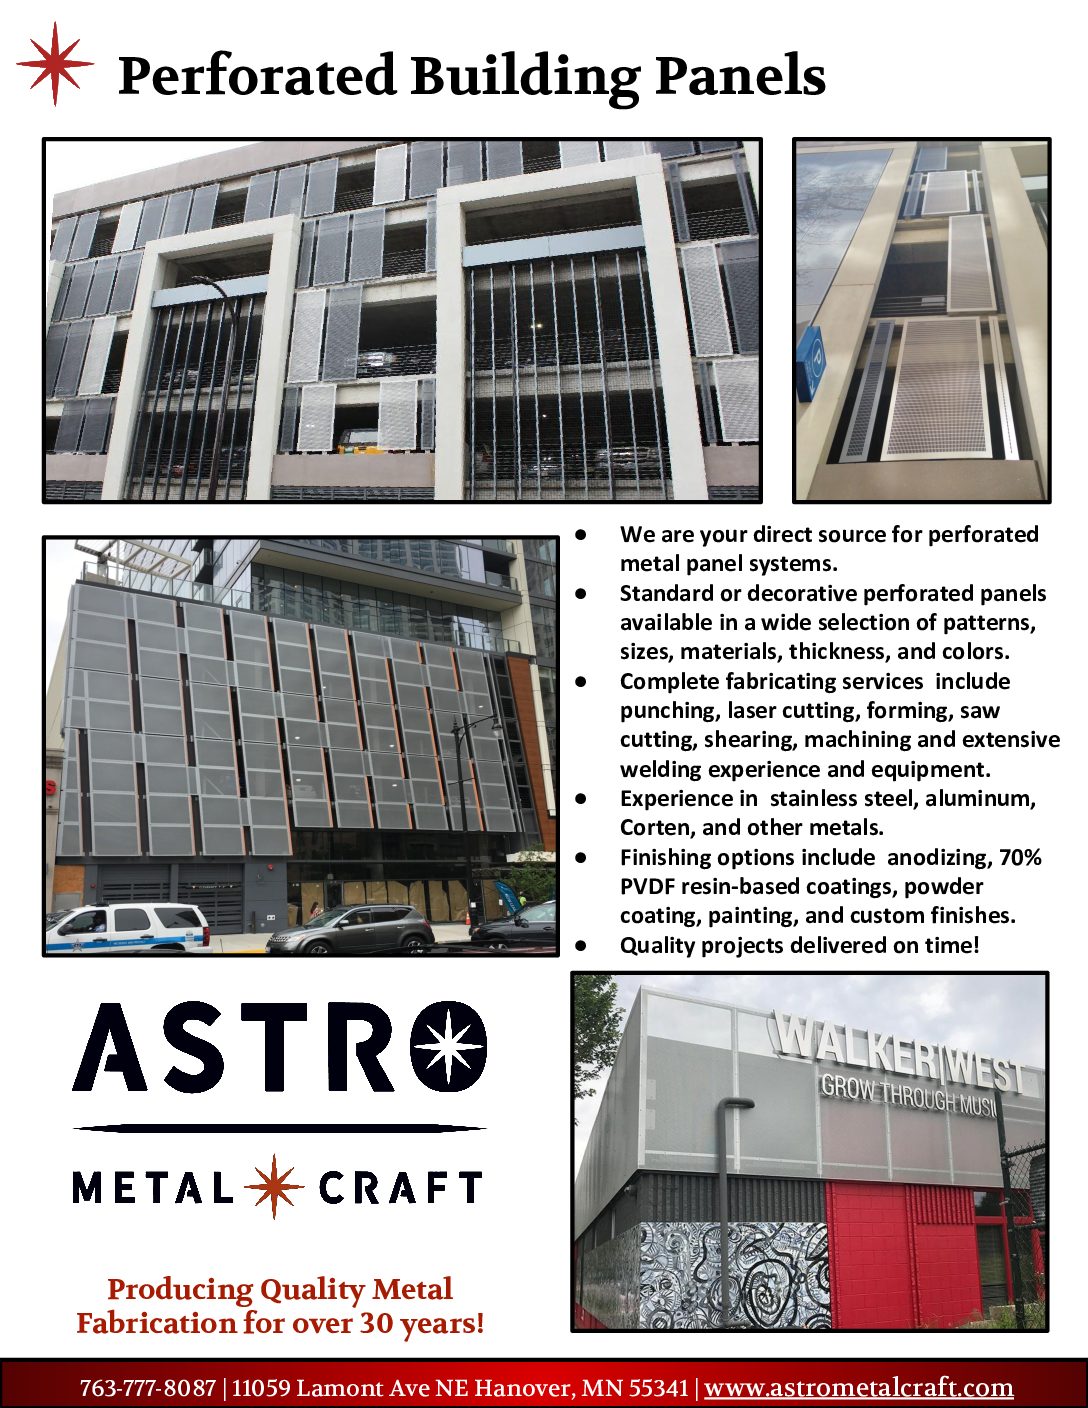 Astro Metal Craft – Perforated Building Panels Line Card